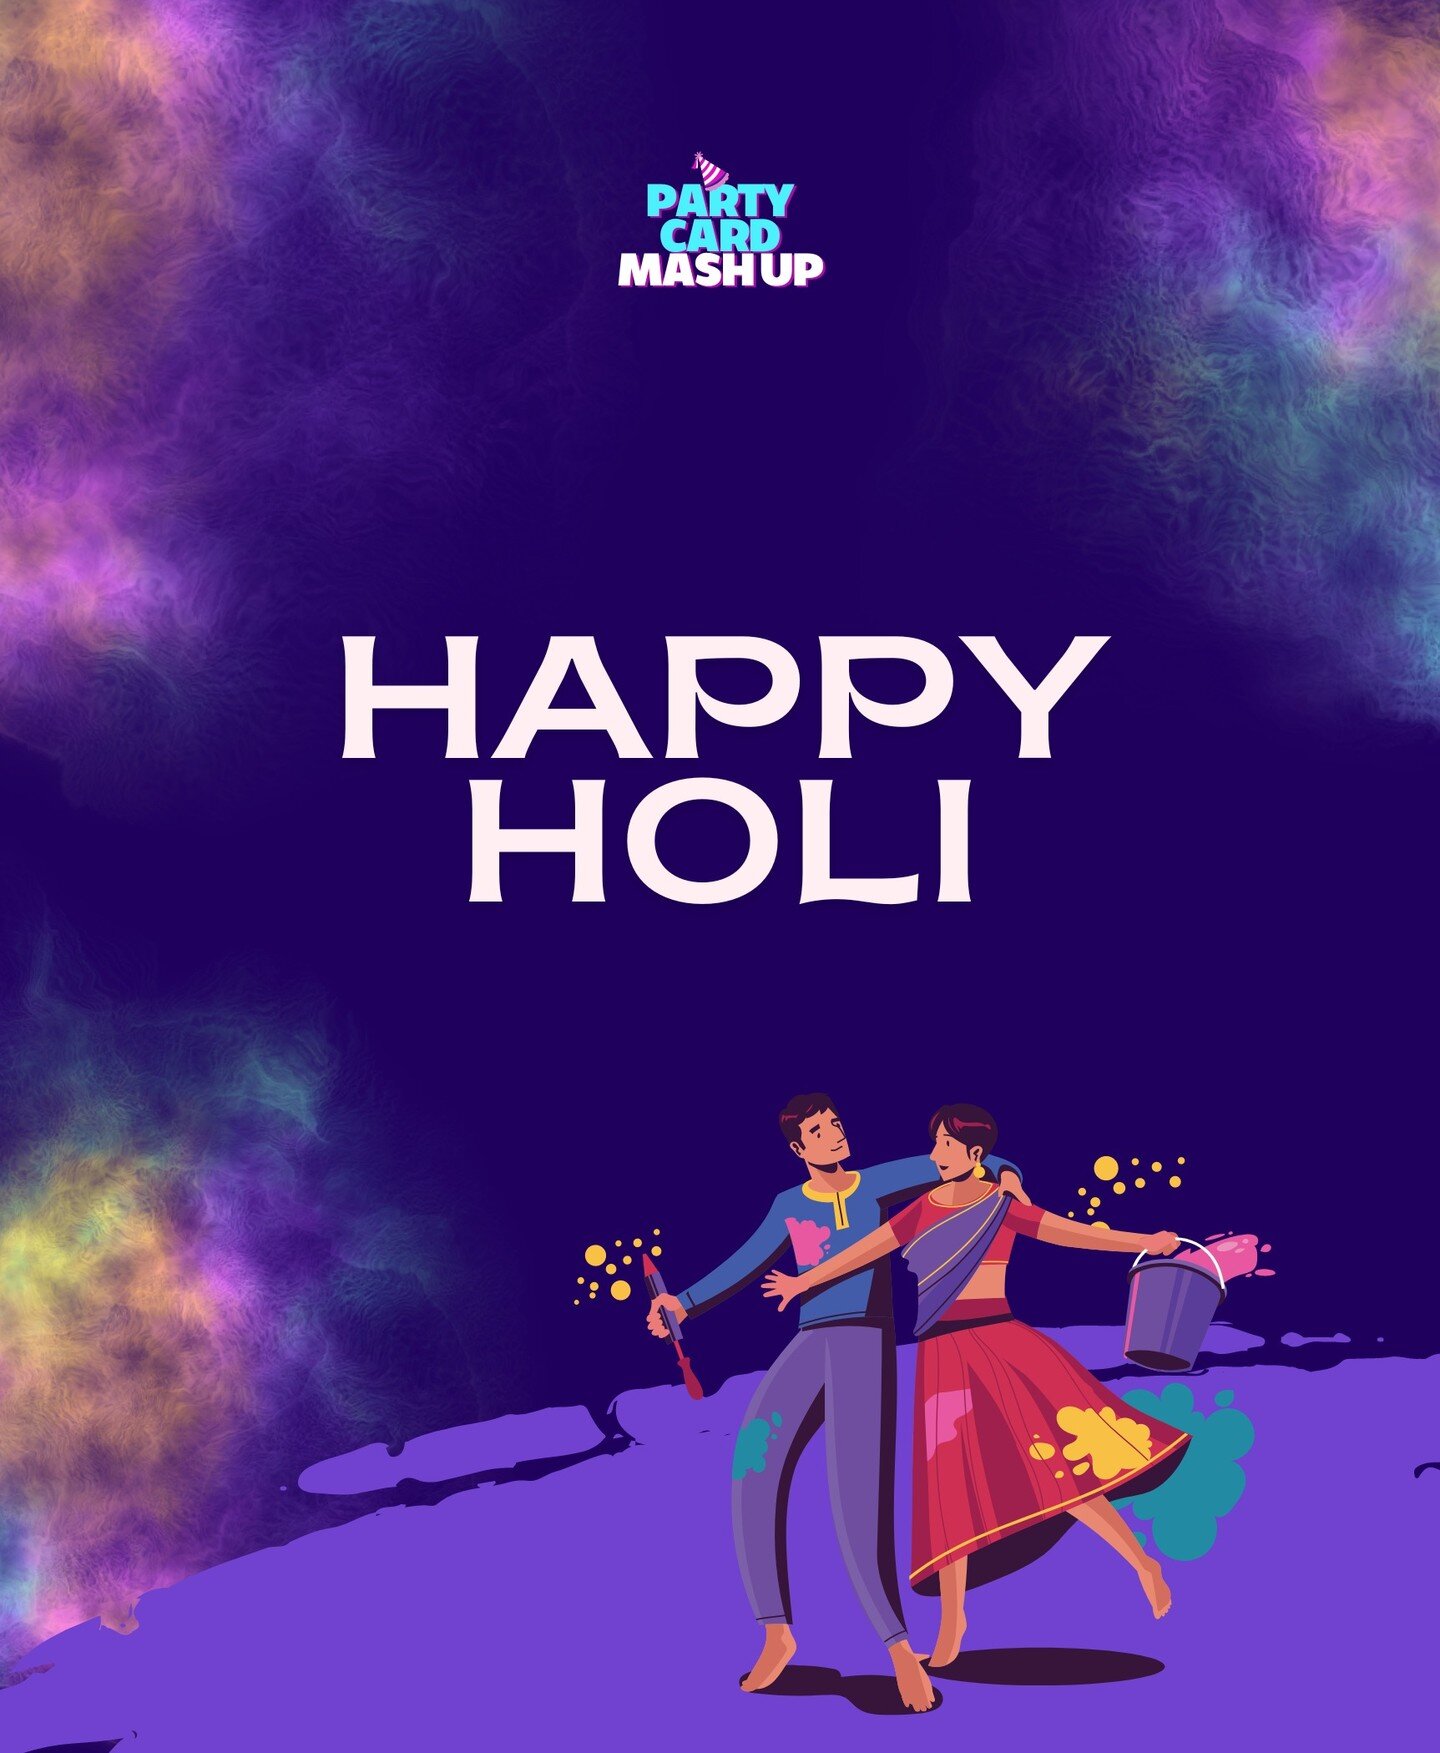 Better late than never right! Happy Holi to our customers that celebrated the festival of colors yesterday!

What is Holi?
Holi, the festival of colors, is celebrated on March 25 and acquires a renowned spot in ancient Hindu festivals. The excitement